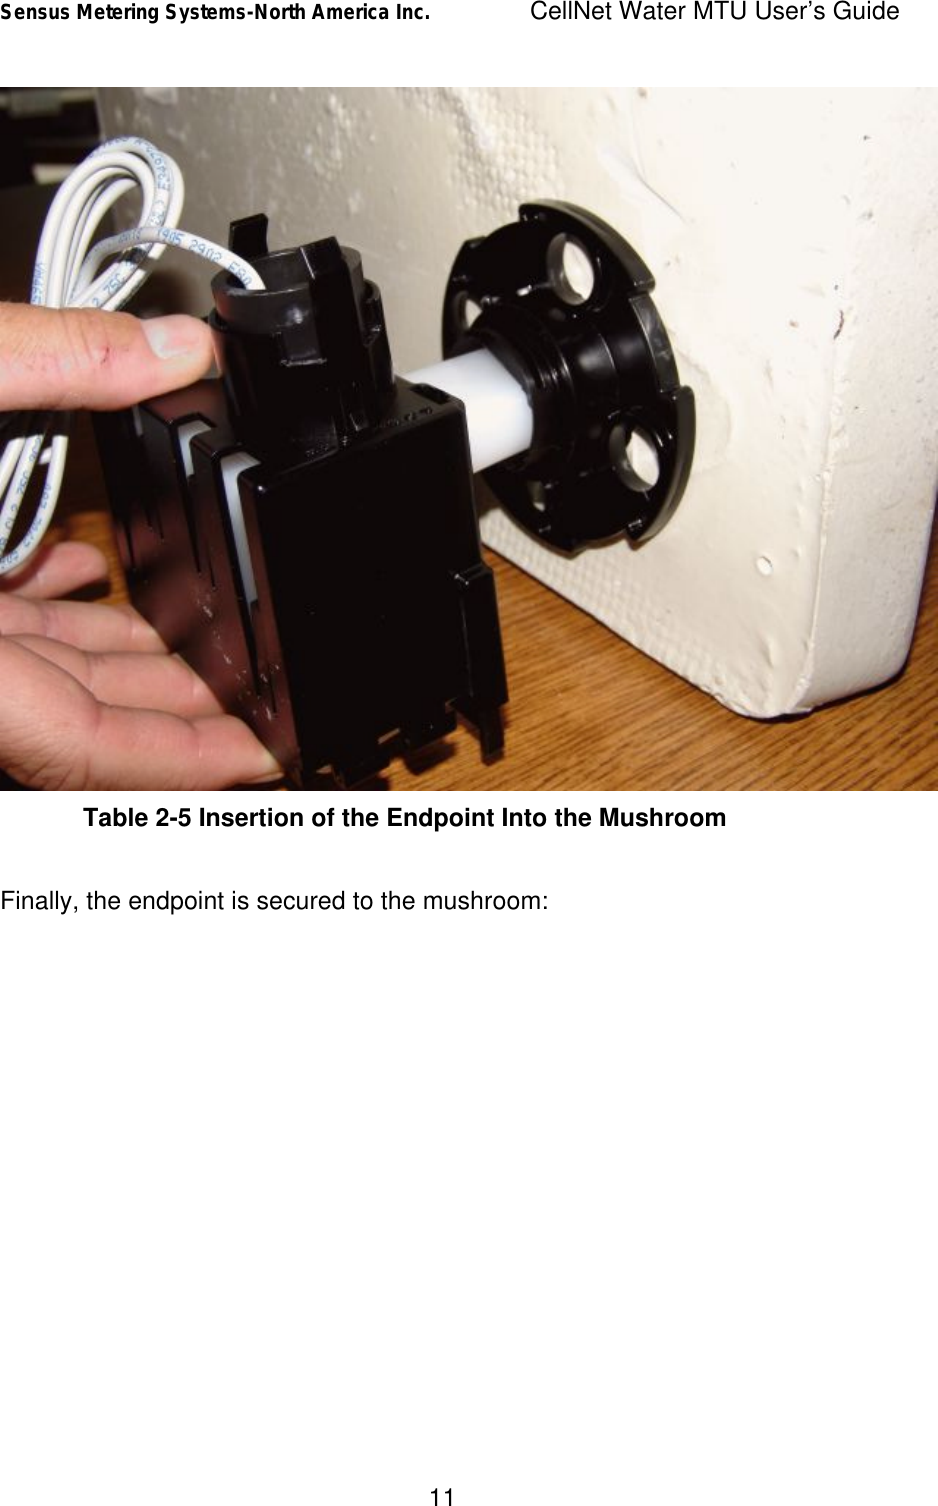 Sensus Metering Systems-North America Inc.    CellNet Water MTU User’s Guide 11  Table 2-5 Insertion of the Endpoint Into the Mushroom  Finally, the endpoint is secured to the mushroom:  